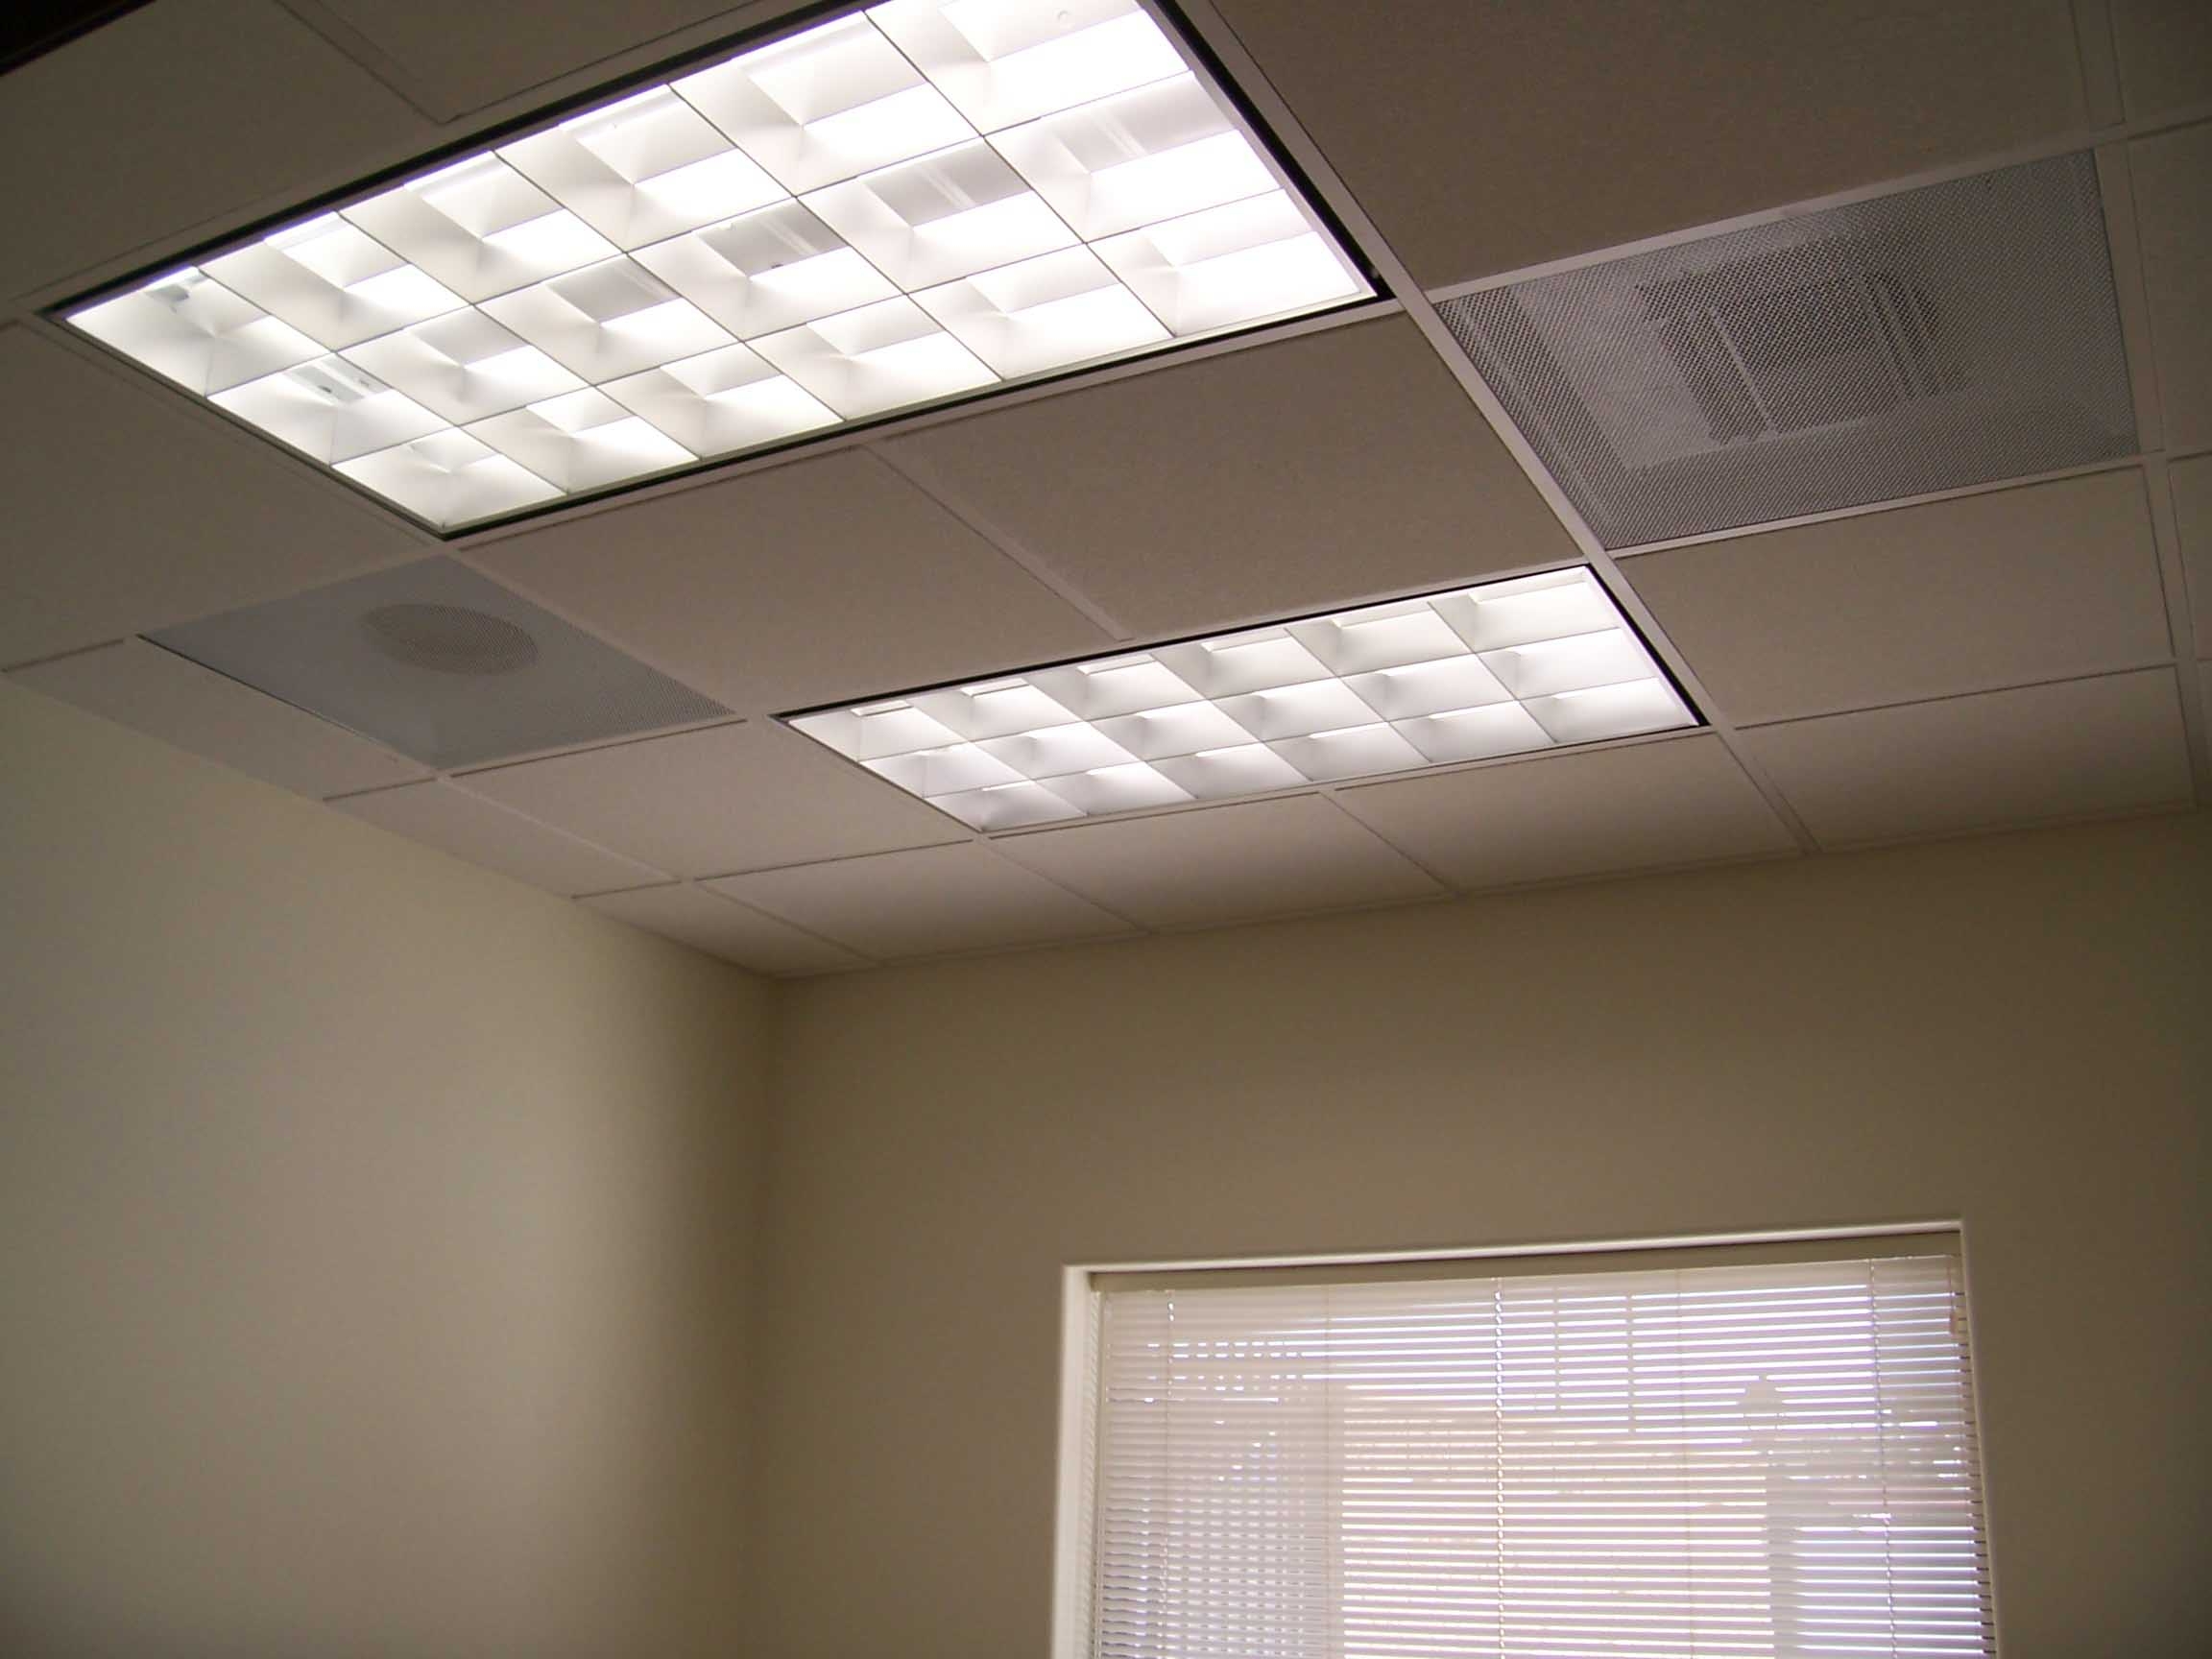 Light Covers For Ceiling Lights Fluorescent